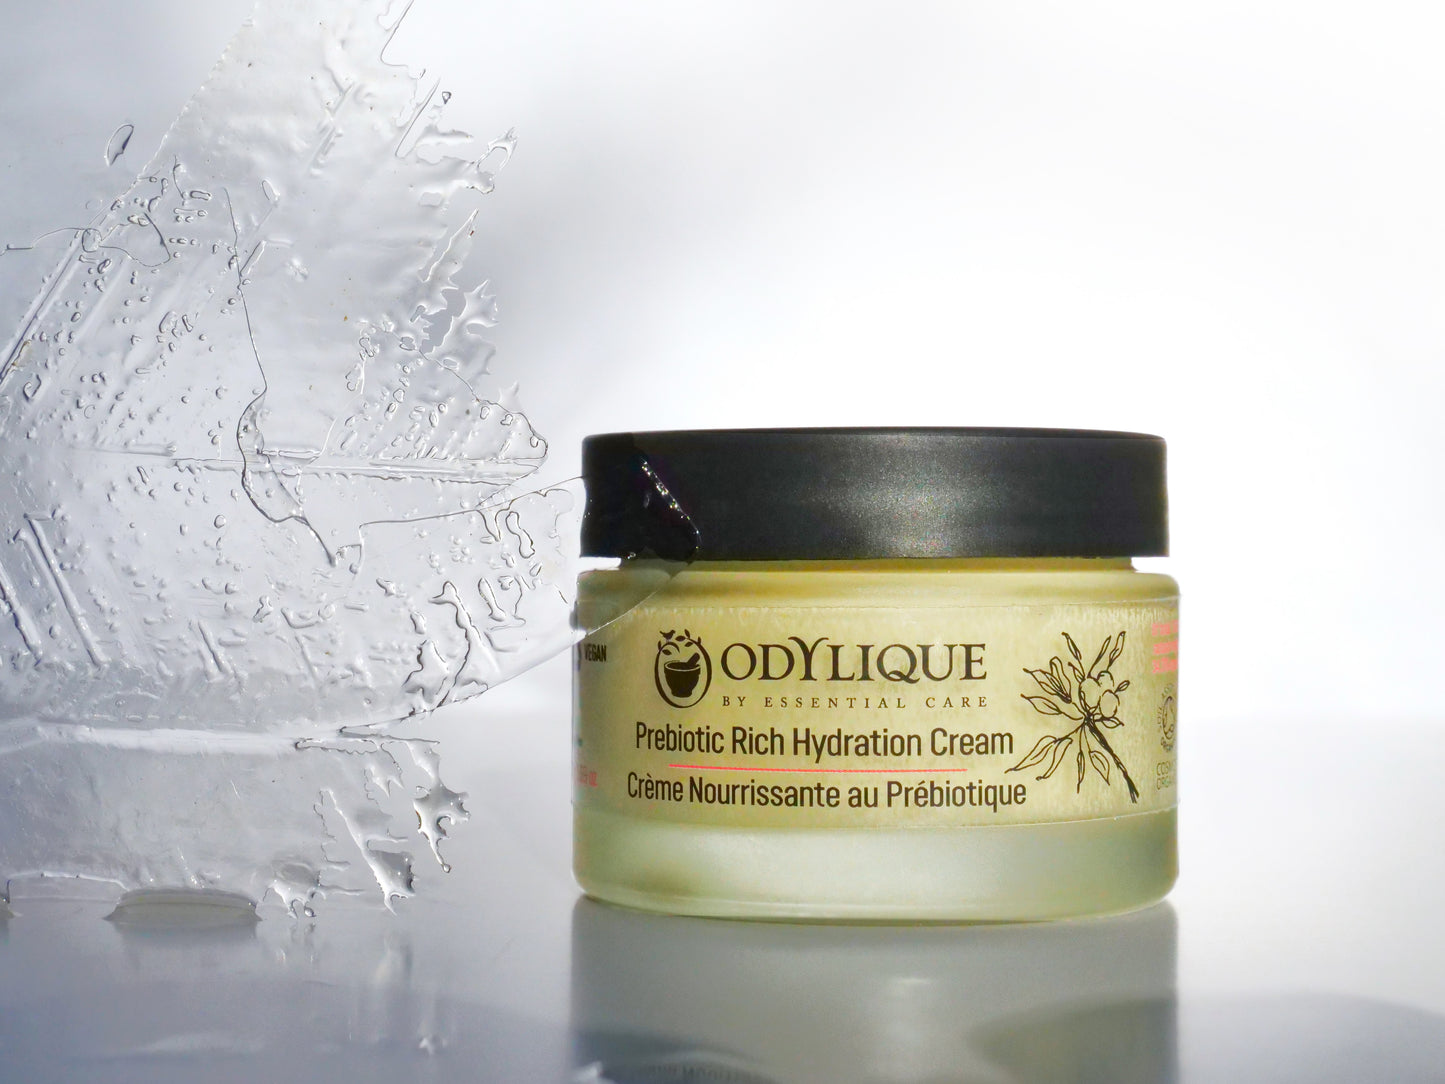 An image of the “Odylique Prebiotic Rich Hydration Cream” against a white/grey background on a reflective surface.